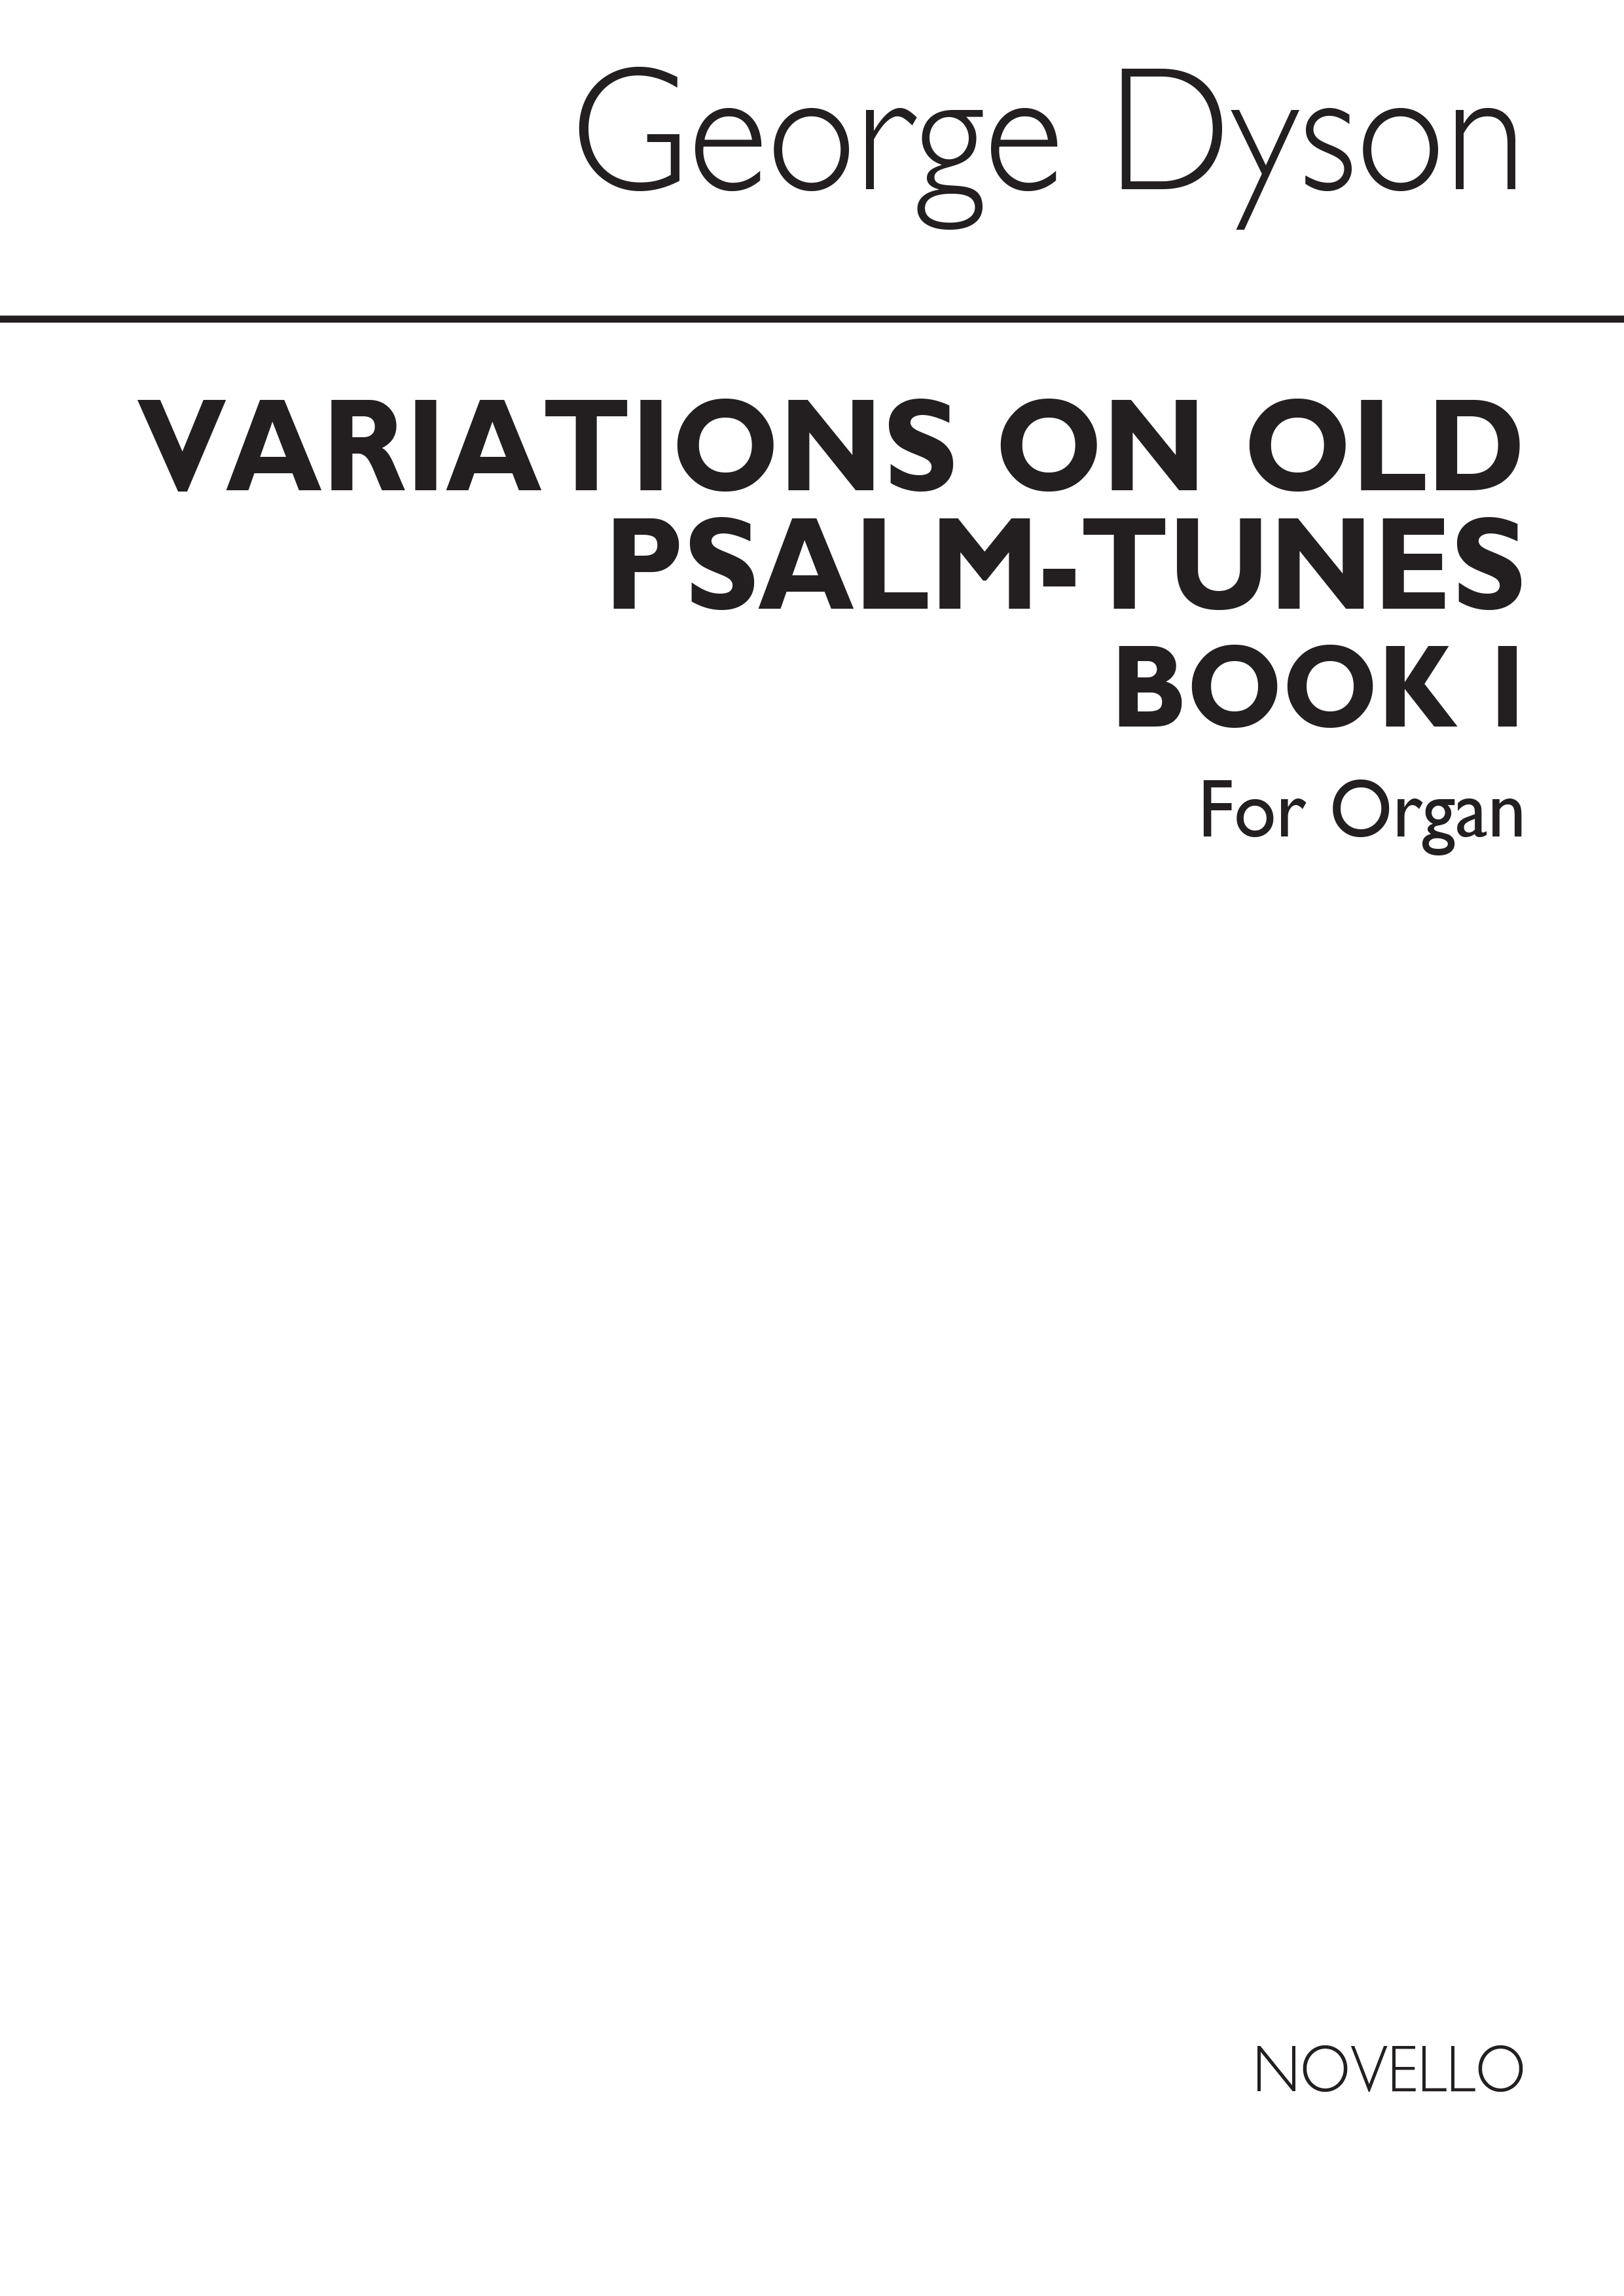 George Dyson: Variations On Old Psalm Tunes for Organ Book 1: Organ: